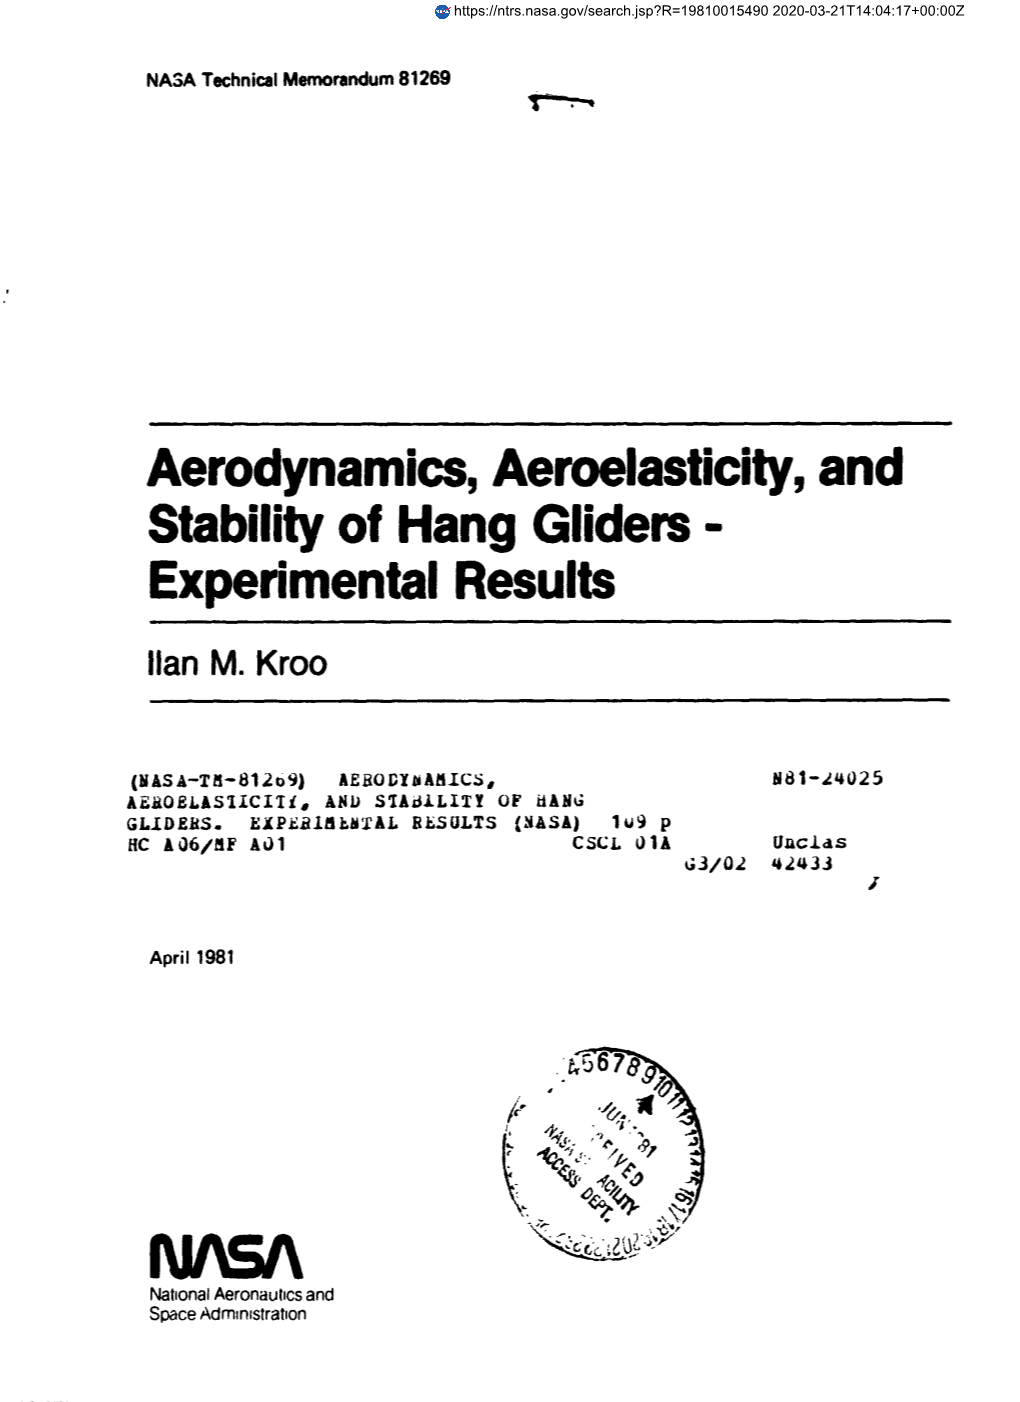 Aerodynamics, Aeroelasticity, and Stability of Hang Gliders - Experimental Results